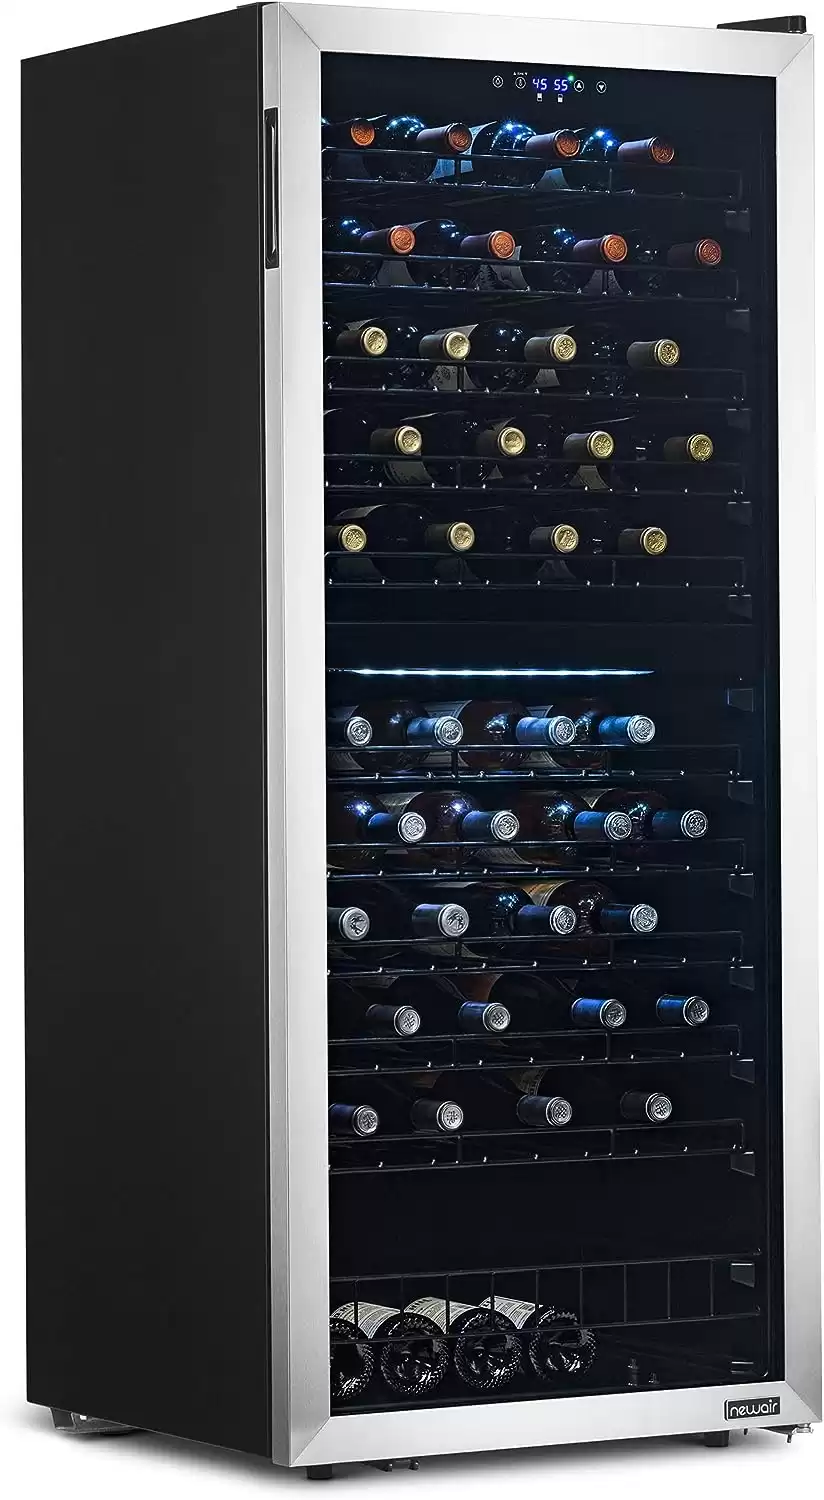 NewAir 98 Bottle Dual Zone Compressor Ultra-Quiet Wine Cooler with Low-Vibration, Adjustable Racks and Exterior Digital Thermostat